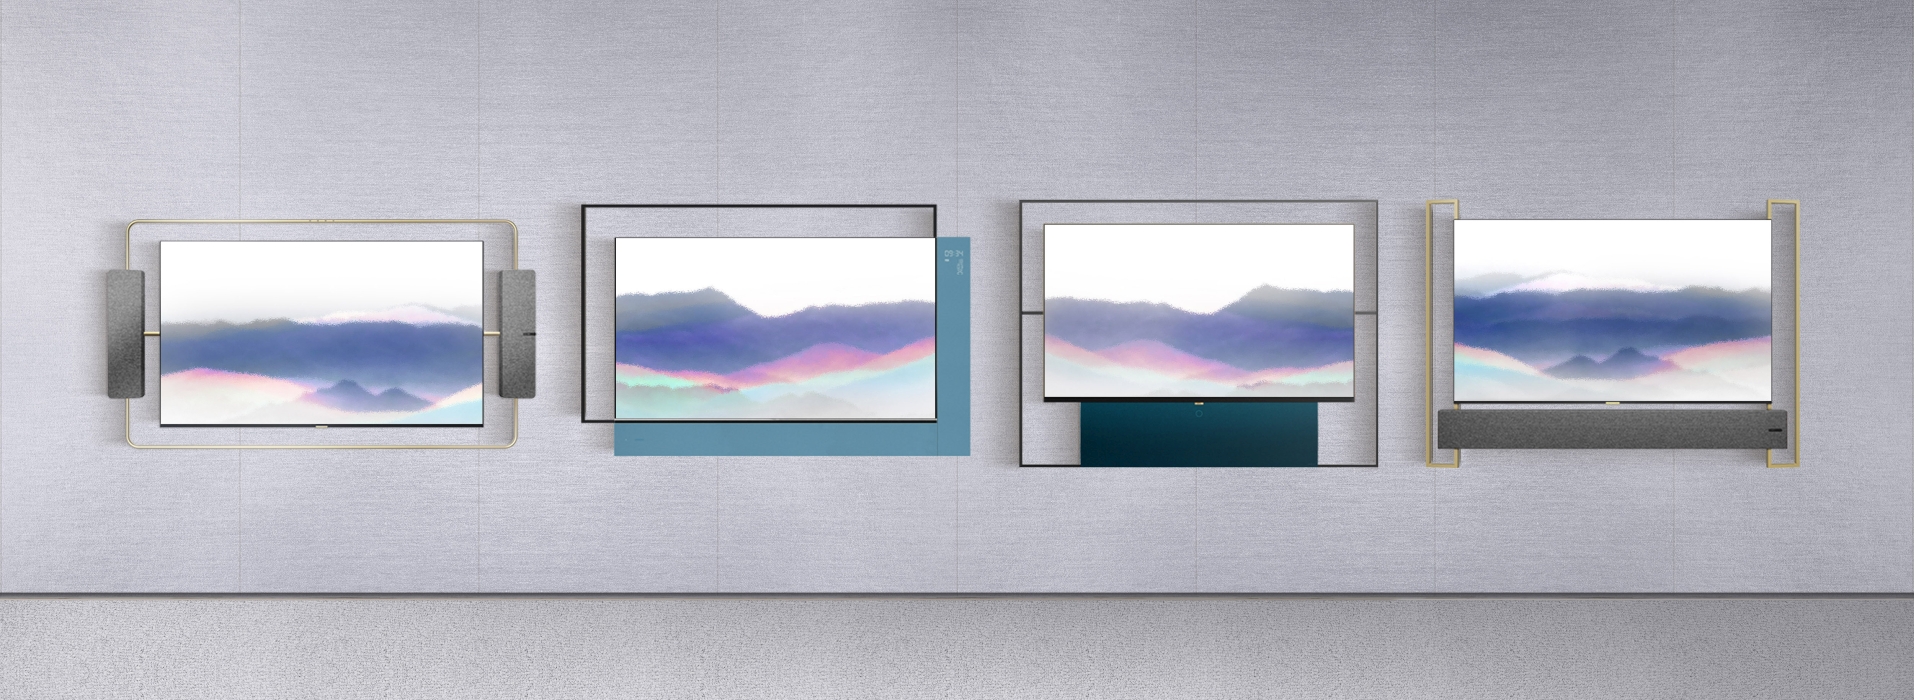 TCL_Living_Window_Series_Art_Deco,_Abstract_Beauty,_Modern_Simplicity_and_Oriental_Elegance_(from_left_to_right)